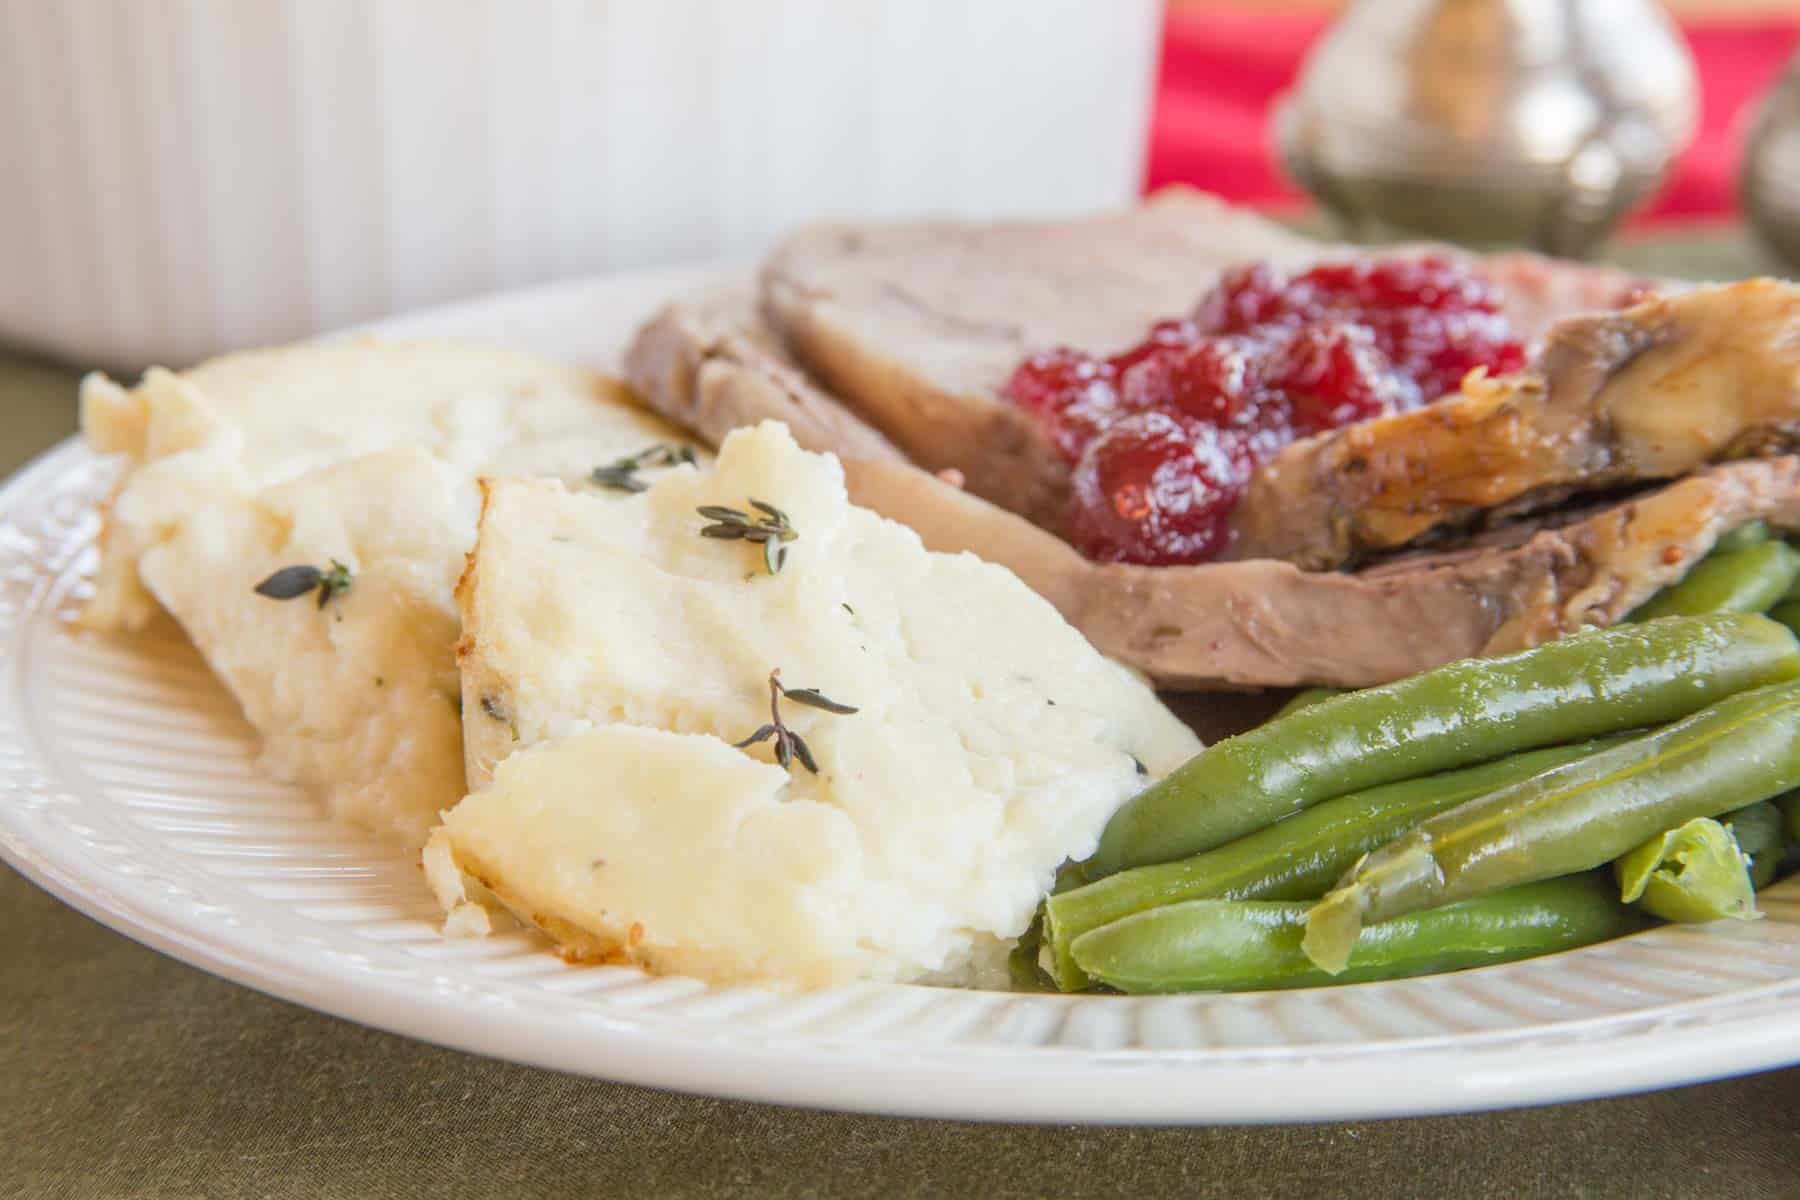 Creamy mashed cauliflower sprinkled with thyme served on a plate with green beans and a couple of slices of prime rib.